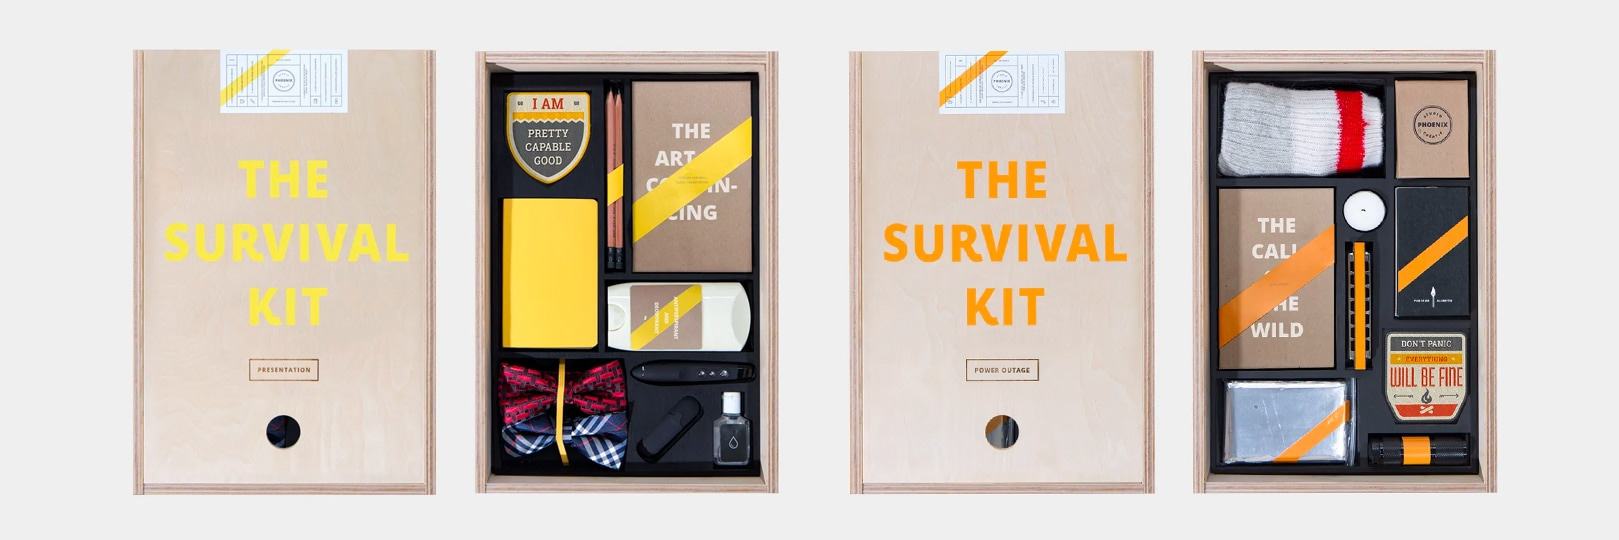 The survival kits you never knew you needed - MOO Blog